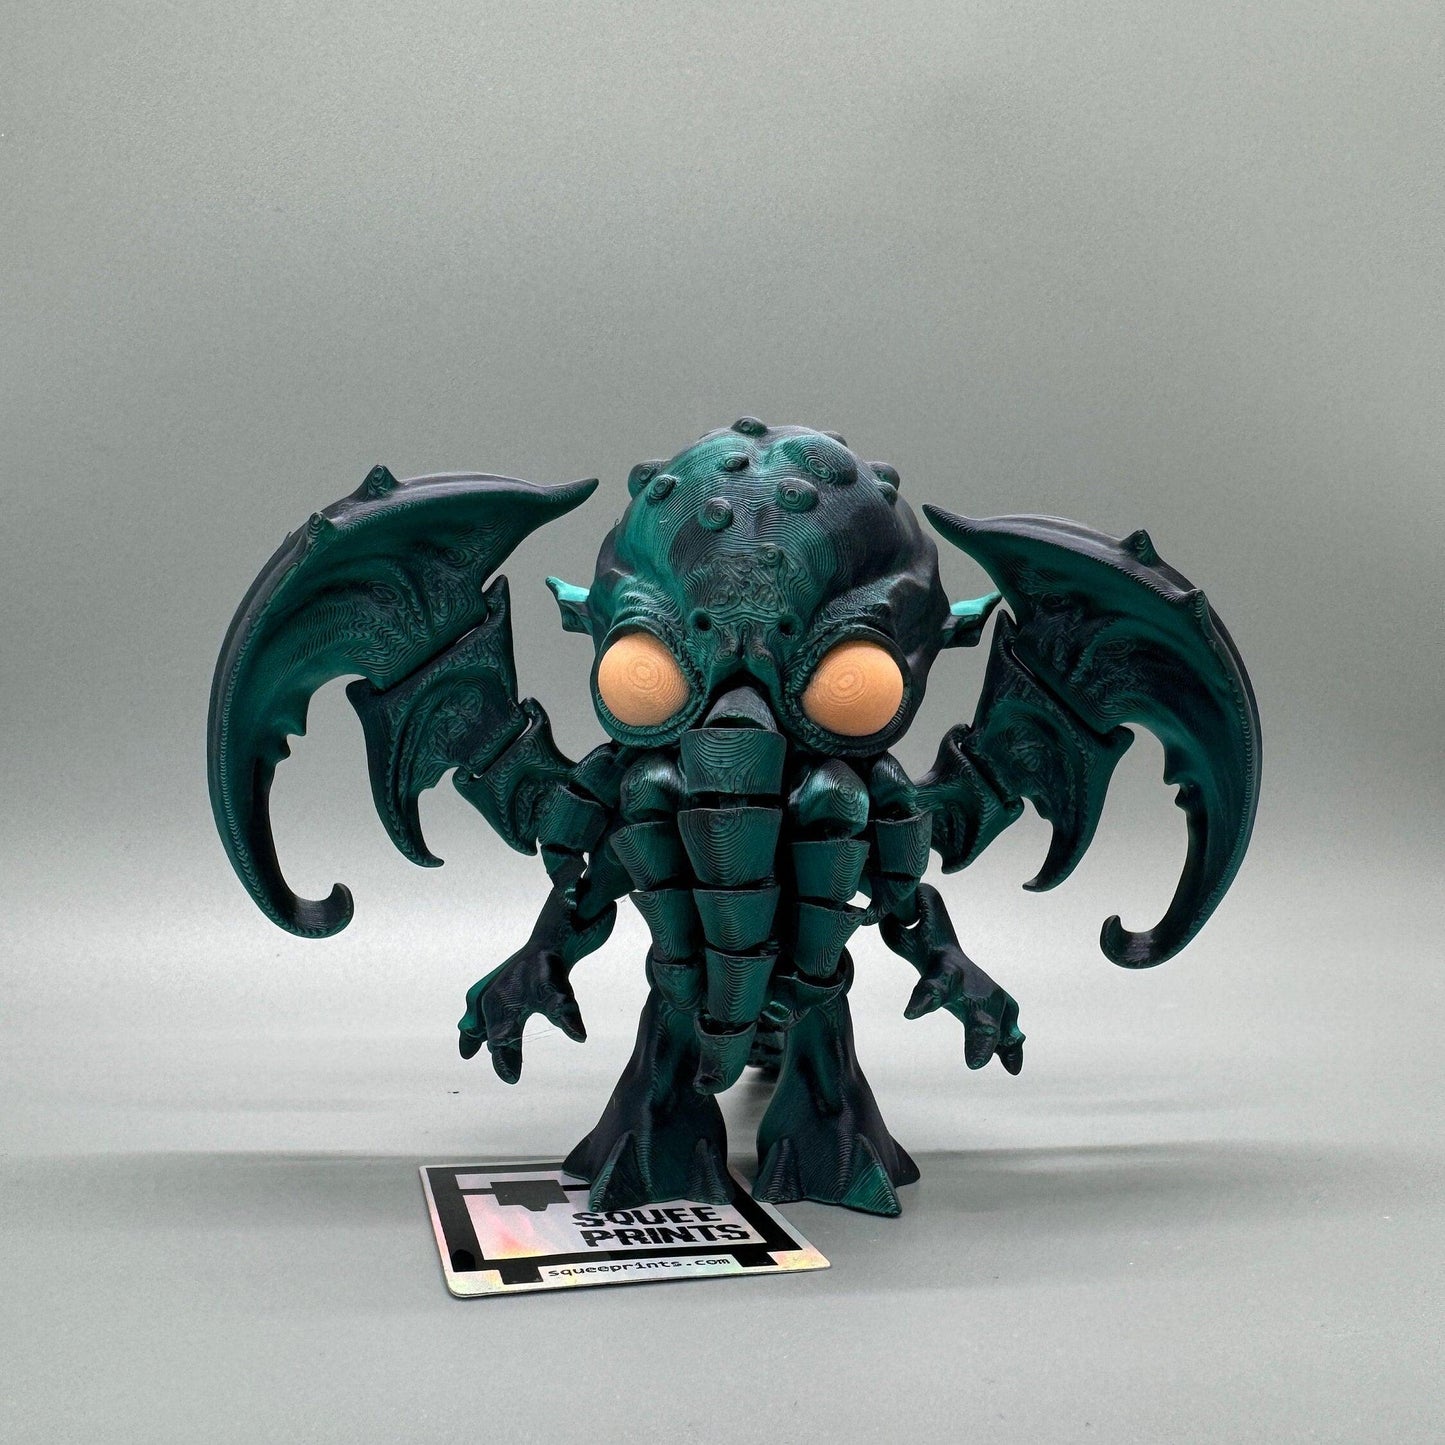 Cthulhu | Articulated | 3D Print | Fidget | Glow in the Dark - Squee Prints